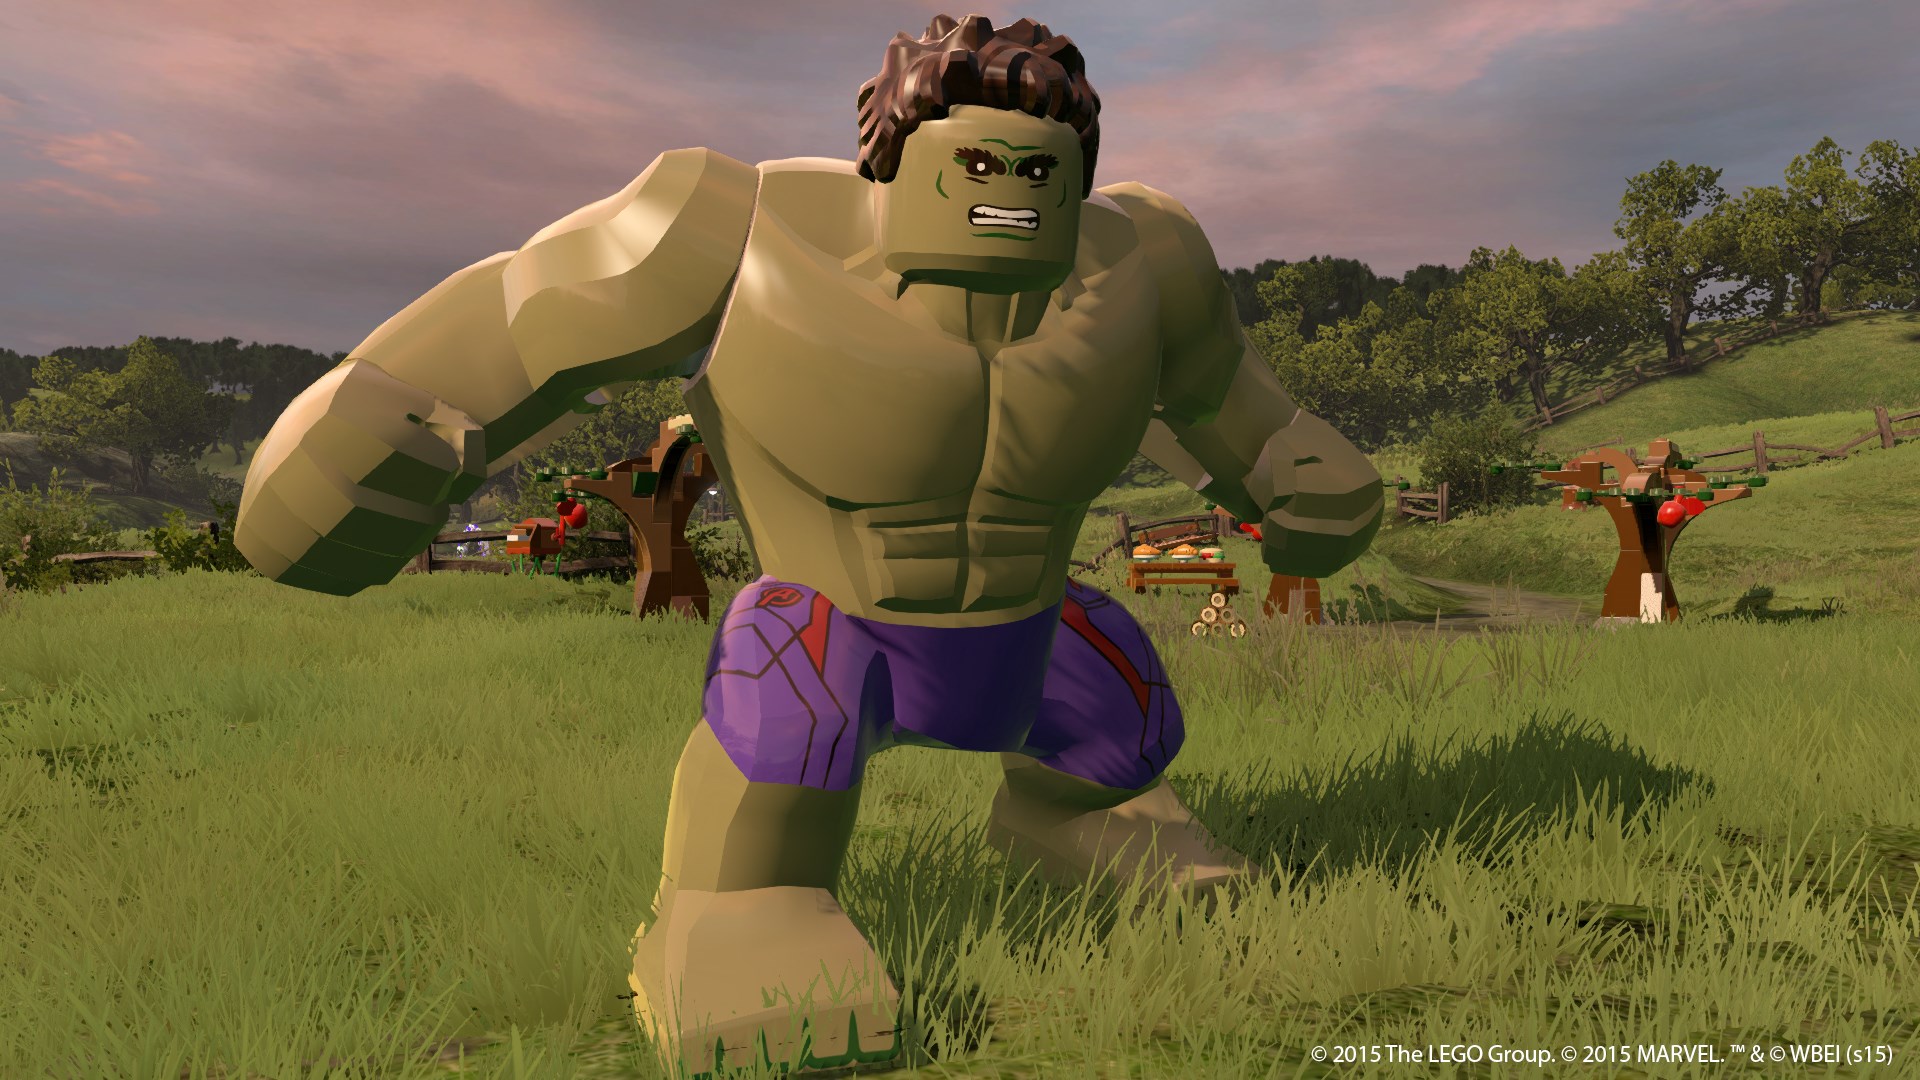 LEGO Marvel's have a tease for the next LEGO game